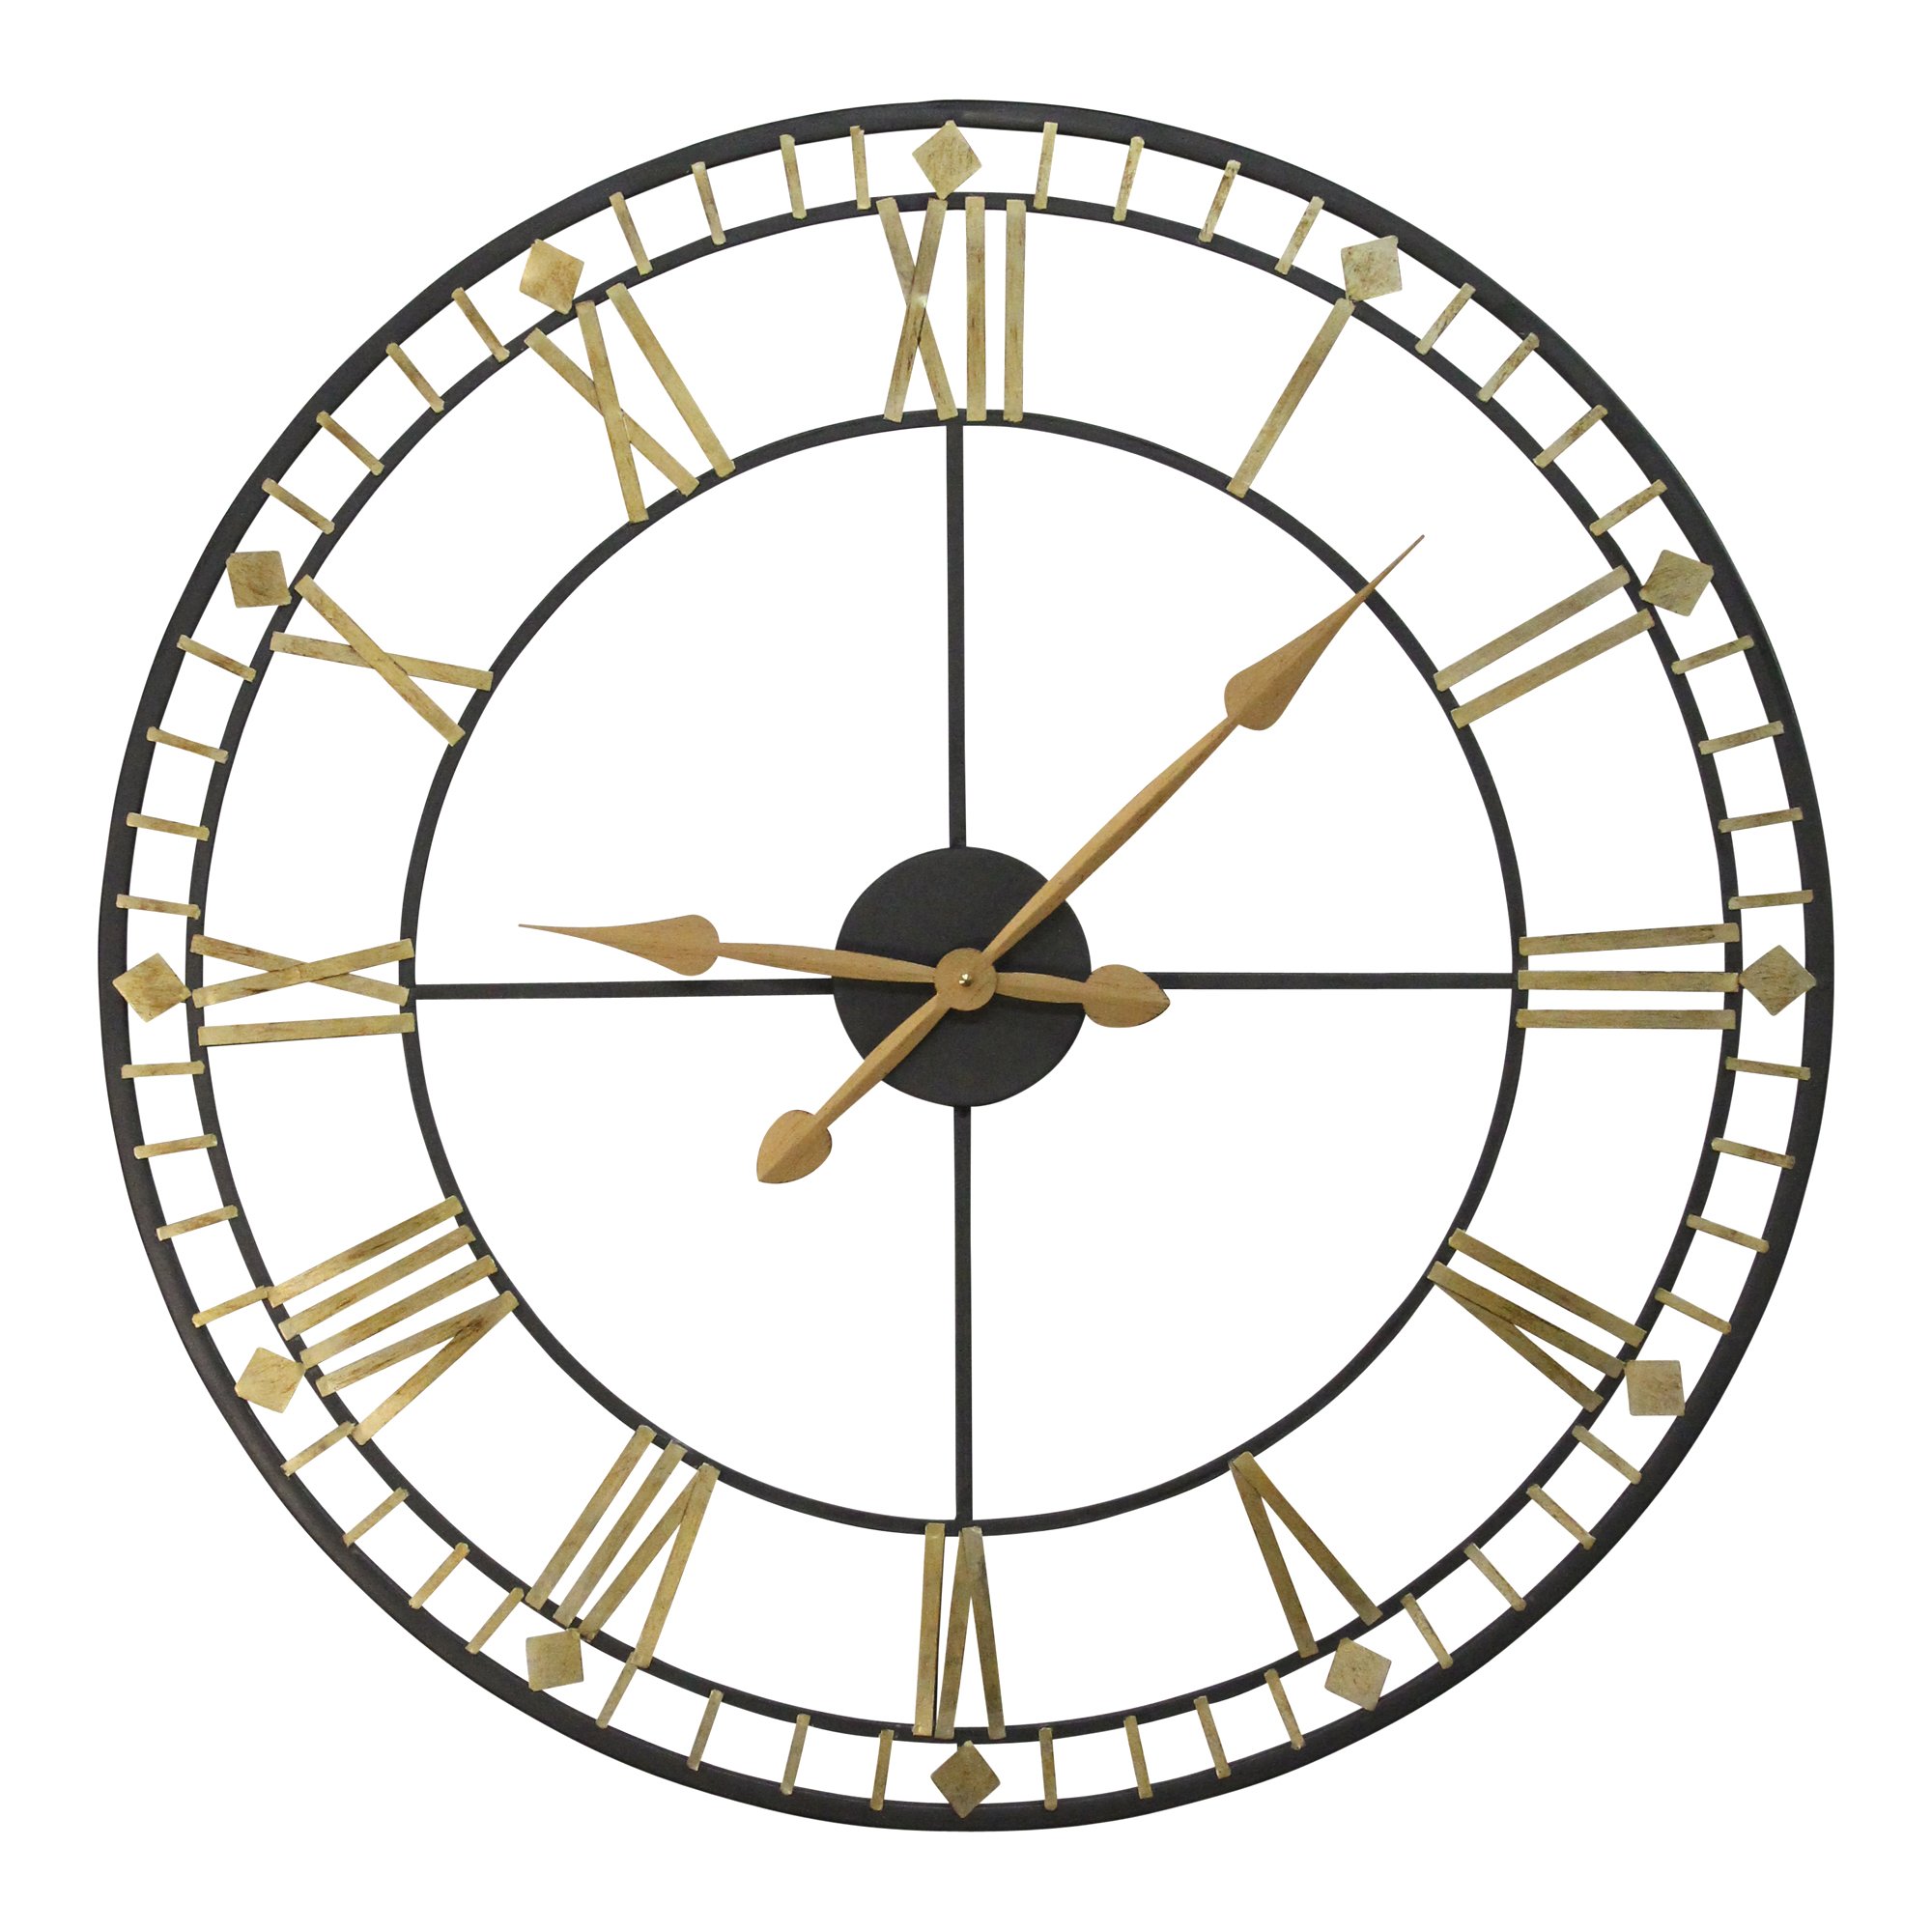 Oversized Vintage Style Metal Wall Clock  Black  Gold Numerals